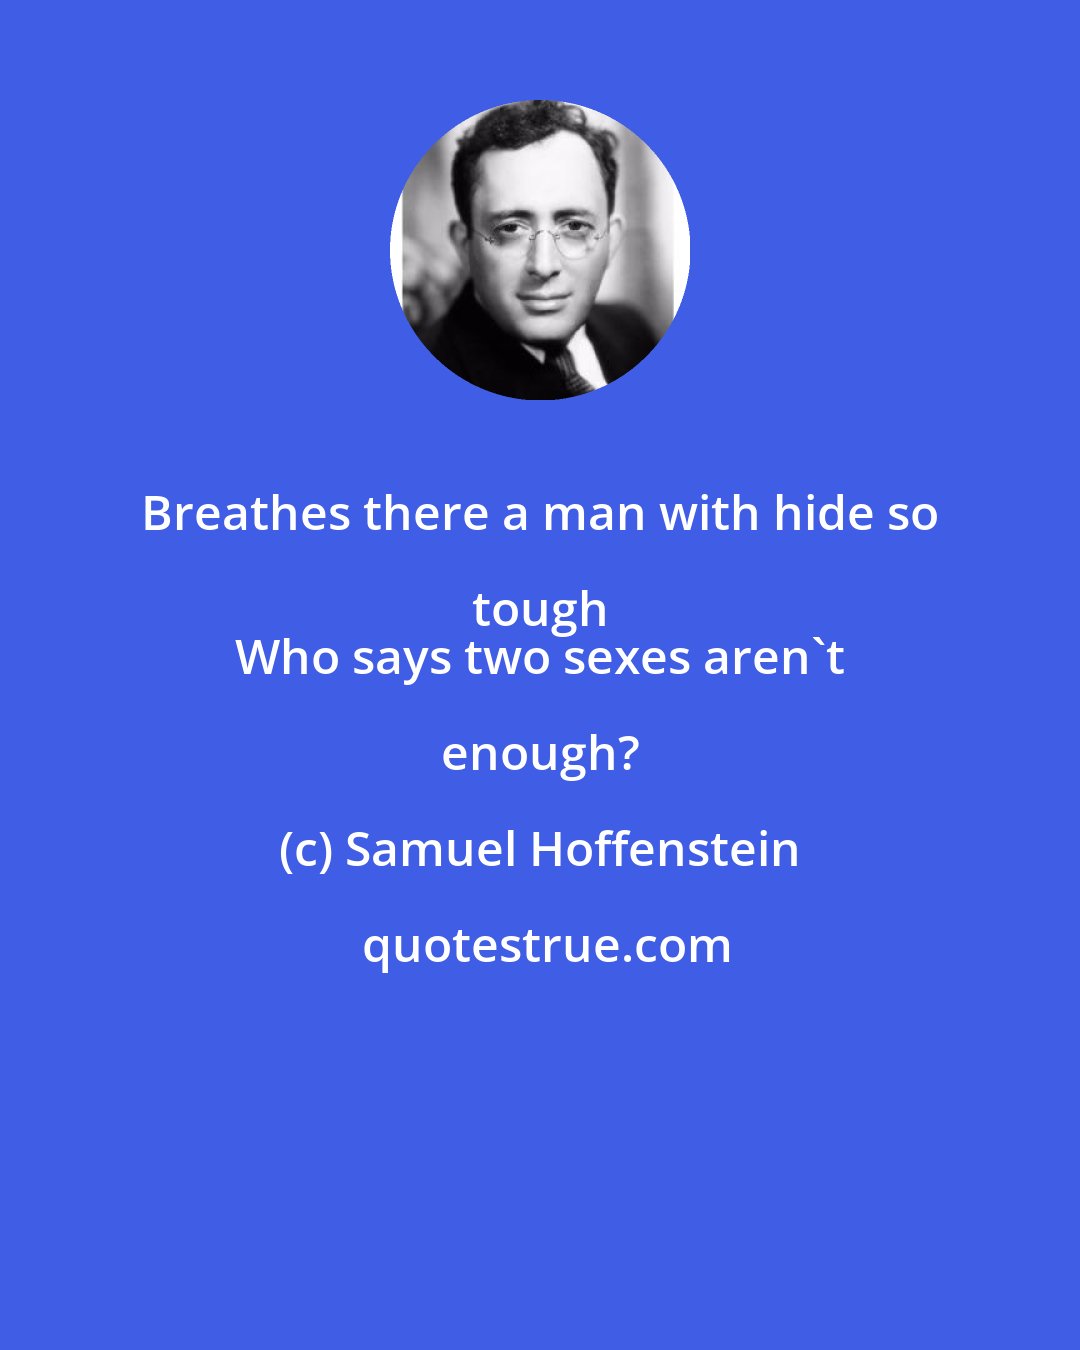 Samuel Hoffenstein: Breathes there a man with hide so tough 
 Who says two sexes aren't enough?